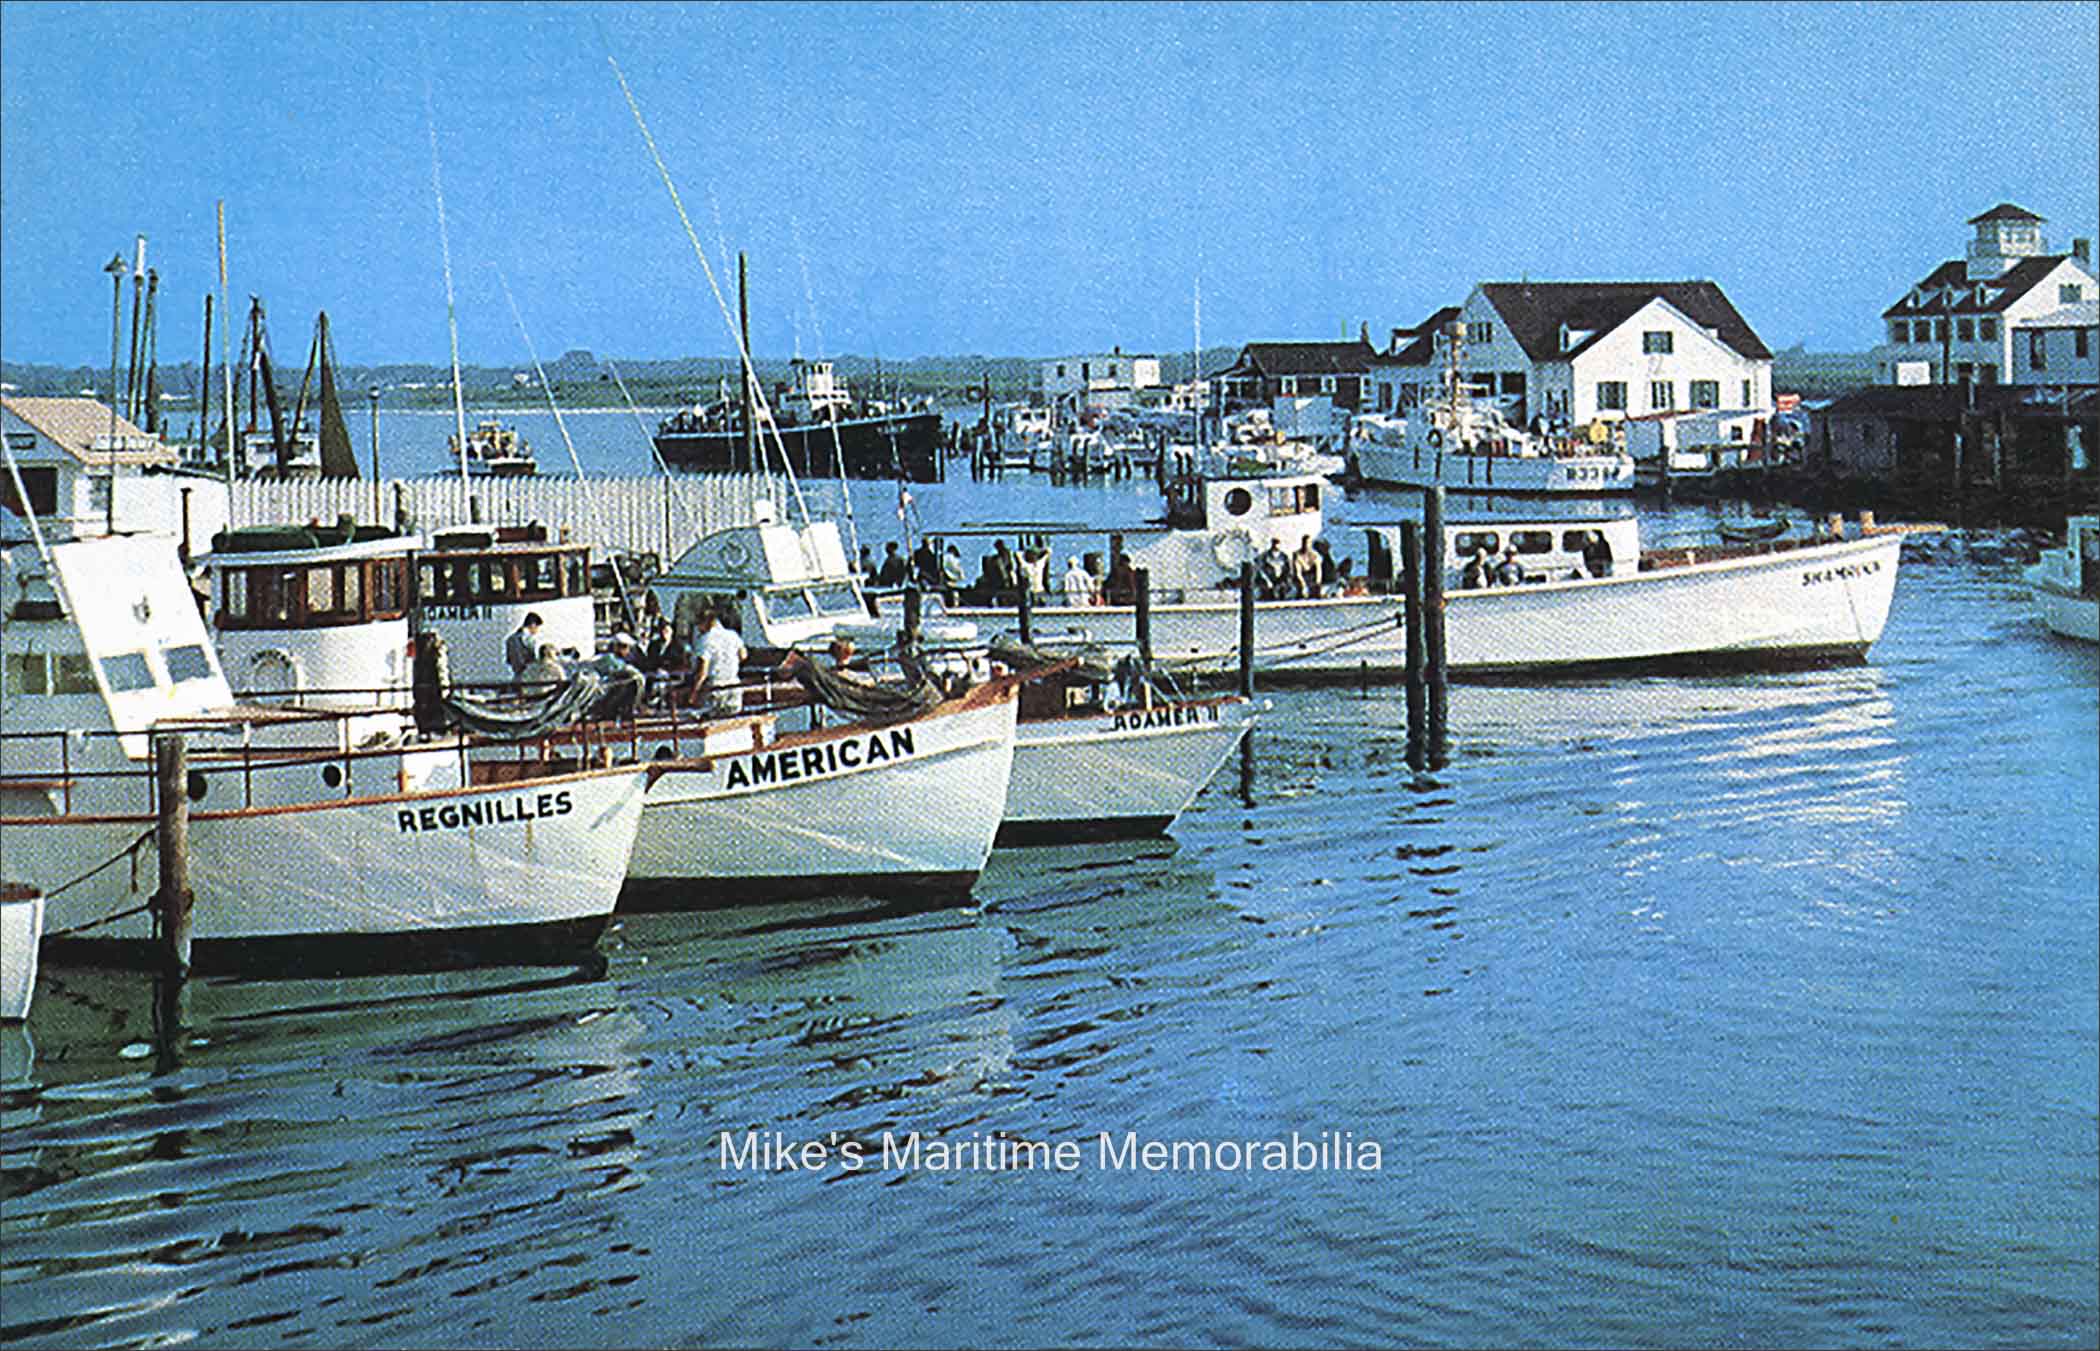 BROADWAY BASIN, Point Pleasant, NJ – 1958 Broadway Basin at Point Pleasant, NJ circa 1958. Seen in this color photo are the Captain Ed Sellinger's "REGNILLES" (his name spelled backwards), Captain Lou Nyhammer's "AMERICAN", Captain John Basnar's "ROMER II", Captain Jack Bogan's "SHAMROCK", and in the background Captain Harry Tonks' "YANK". Captain Sellinger was an expert welder and personally built the 45-foot steel hulled "REGNILLES" in 1951 at Newark, NJ. The 45-foot "AMERICAN" was built in 1945 by Johnson Brothers Boatworks at Bay Head, NJ and originally sailed as the Bogan Fishing Fleet's "PARAMOUNT V". The 45-foot "ROAMER II" was built in 1916 at New York, NY and originally sailed from Sheepshead Bay, Brooklyn, NY. The 65-foot "SHAMROCK" was built in 1953 by the Van Sant Boat Yard at Atlantic City, NJ and she was the first party boat ever built with a flush deck, that is, her cabins and heads were located on the main deck. In 1971, Captain Bogan sold the boat to his mate, Bob Pennington and she became his first "SEA DEVIL". The 110-foot black-hulled "YANK" was built in 1942 by Mantis Yacht Co. at Camden, NJ as the World War II U.S. Navy Sub Chaser "SC-635". It last sailed as the "BRONX QUEEN" and on December 20, 1989, she encountered rough seas while Whiting fishing near the entrance to Ambrose Channel. She lost a plank in her bow causing her to sink in less than twenty minutes.